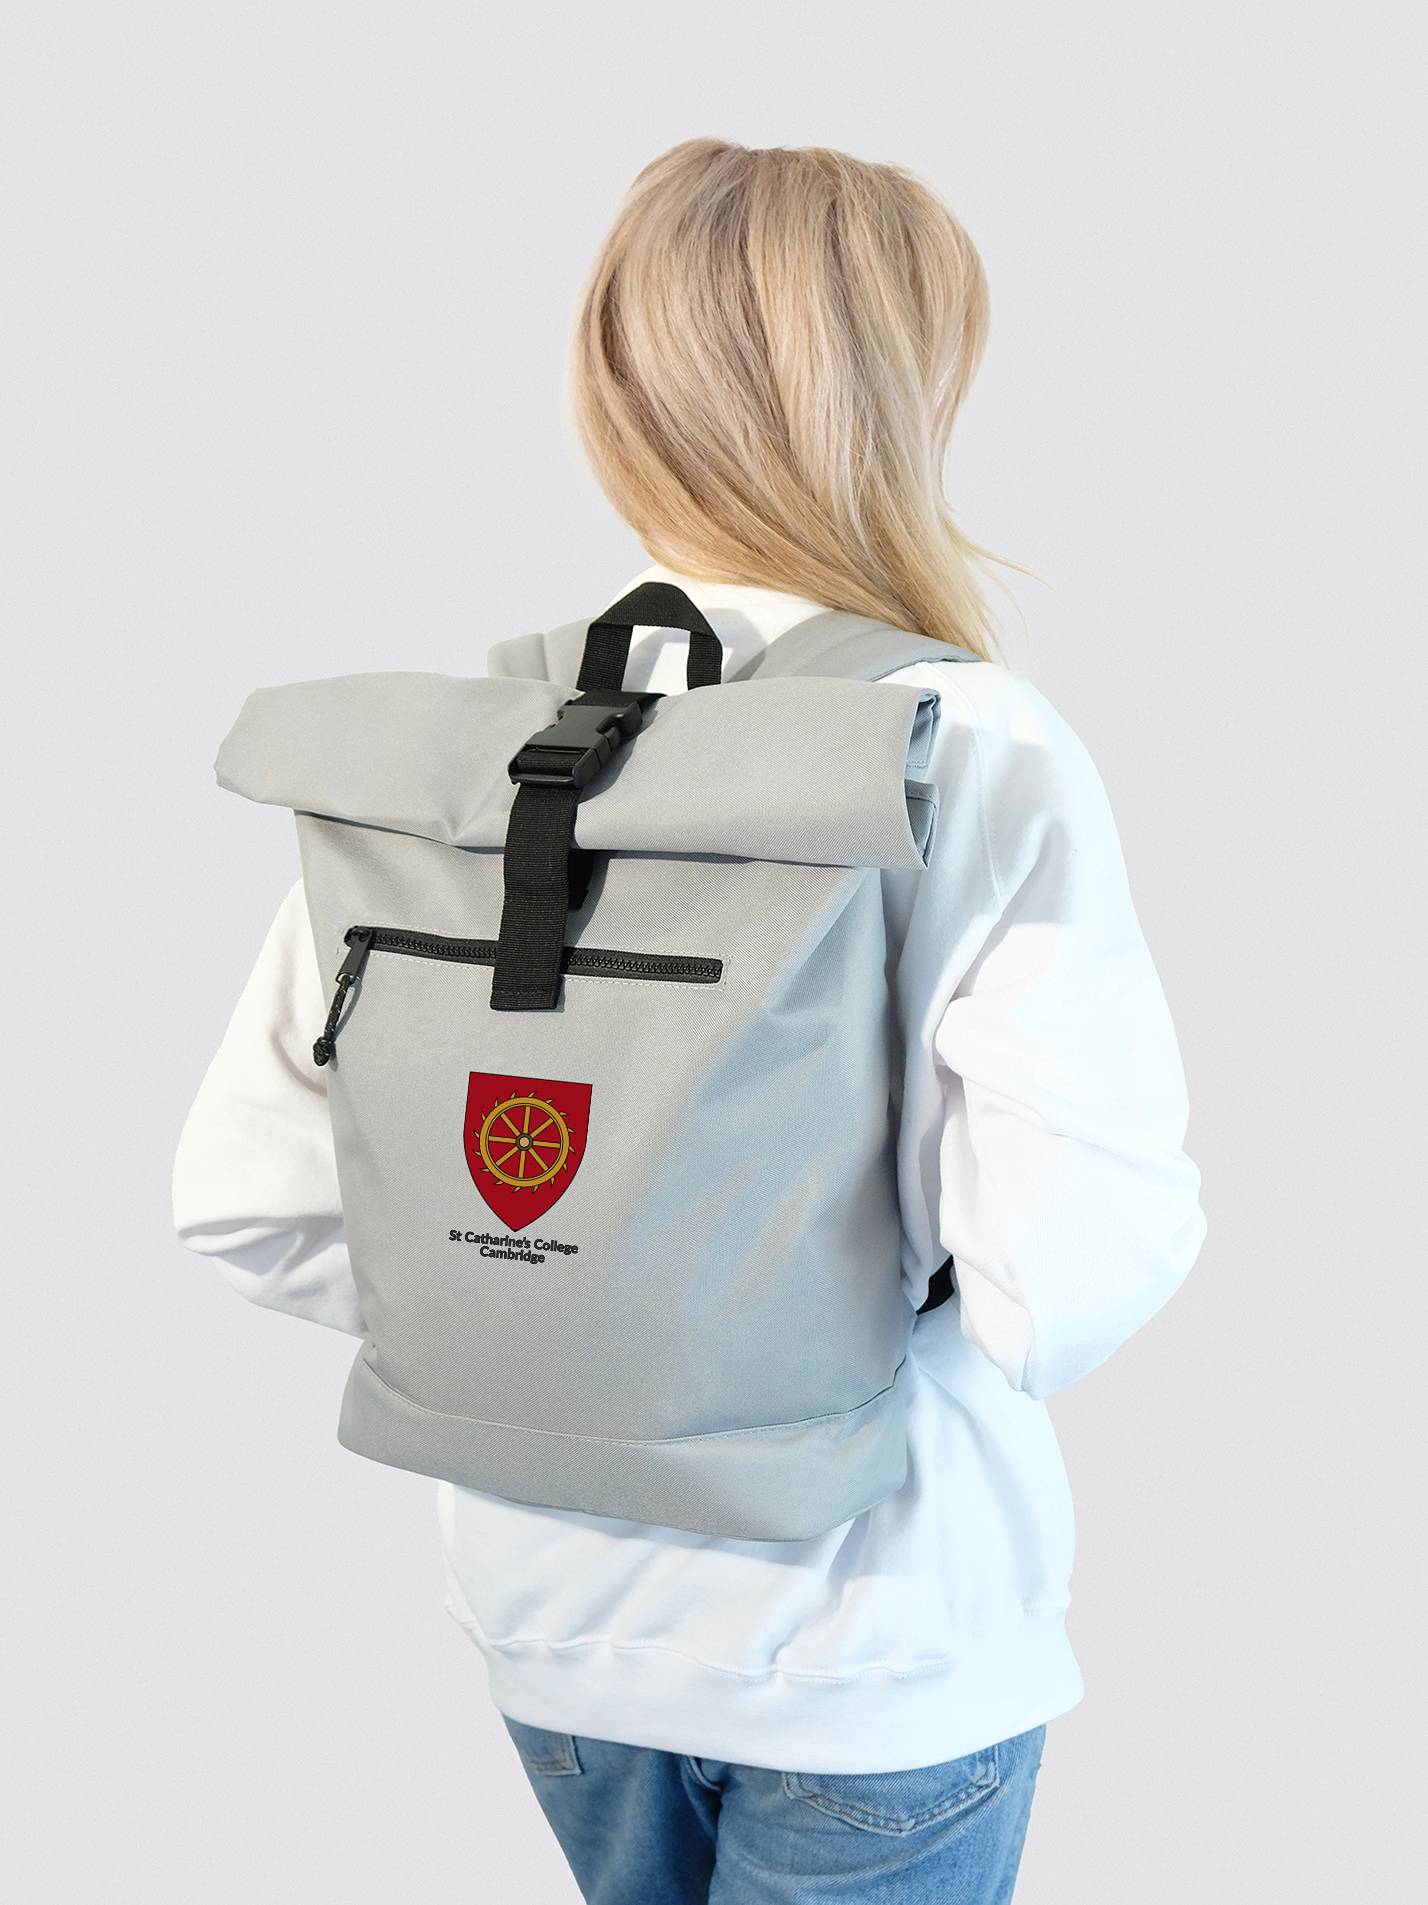 St Catharine's College Cambridge Roll Top Backpack